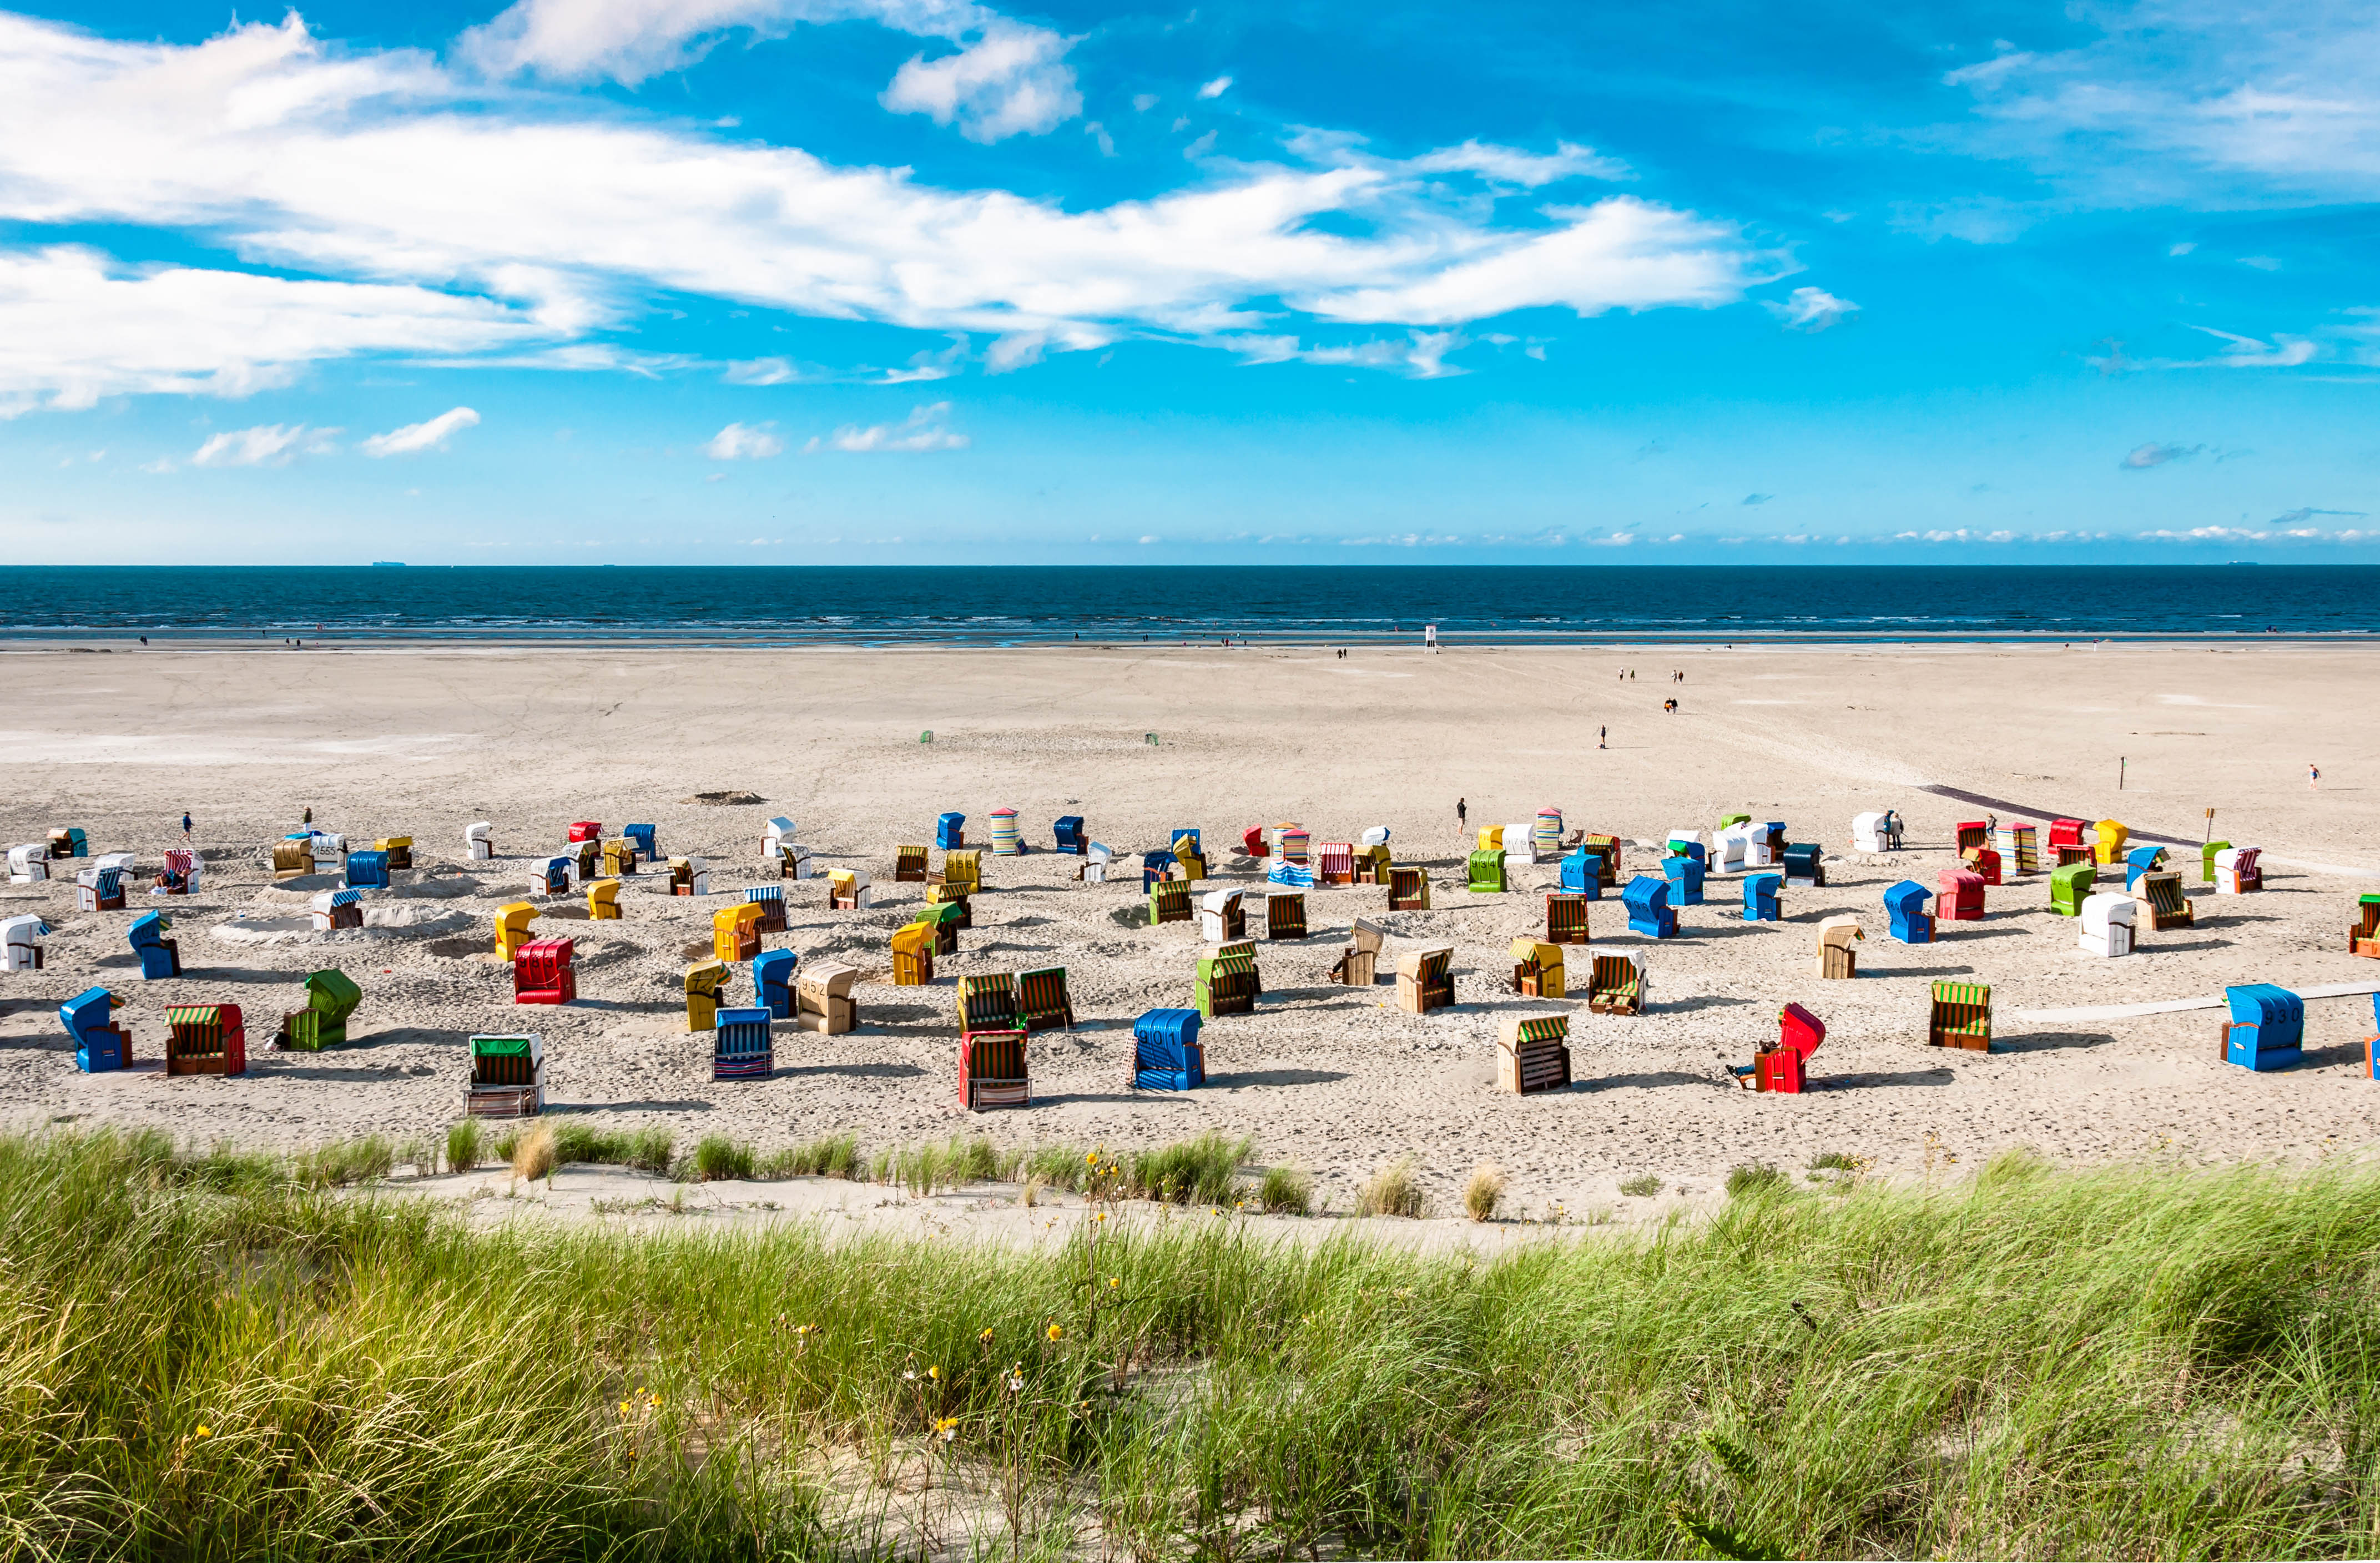 beach-chairs-at-the-island-of-juist-in-germany-istock_77047657_xlarge-2